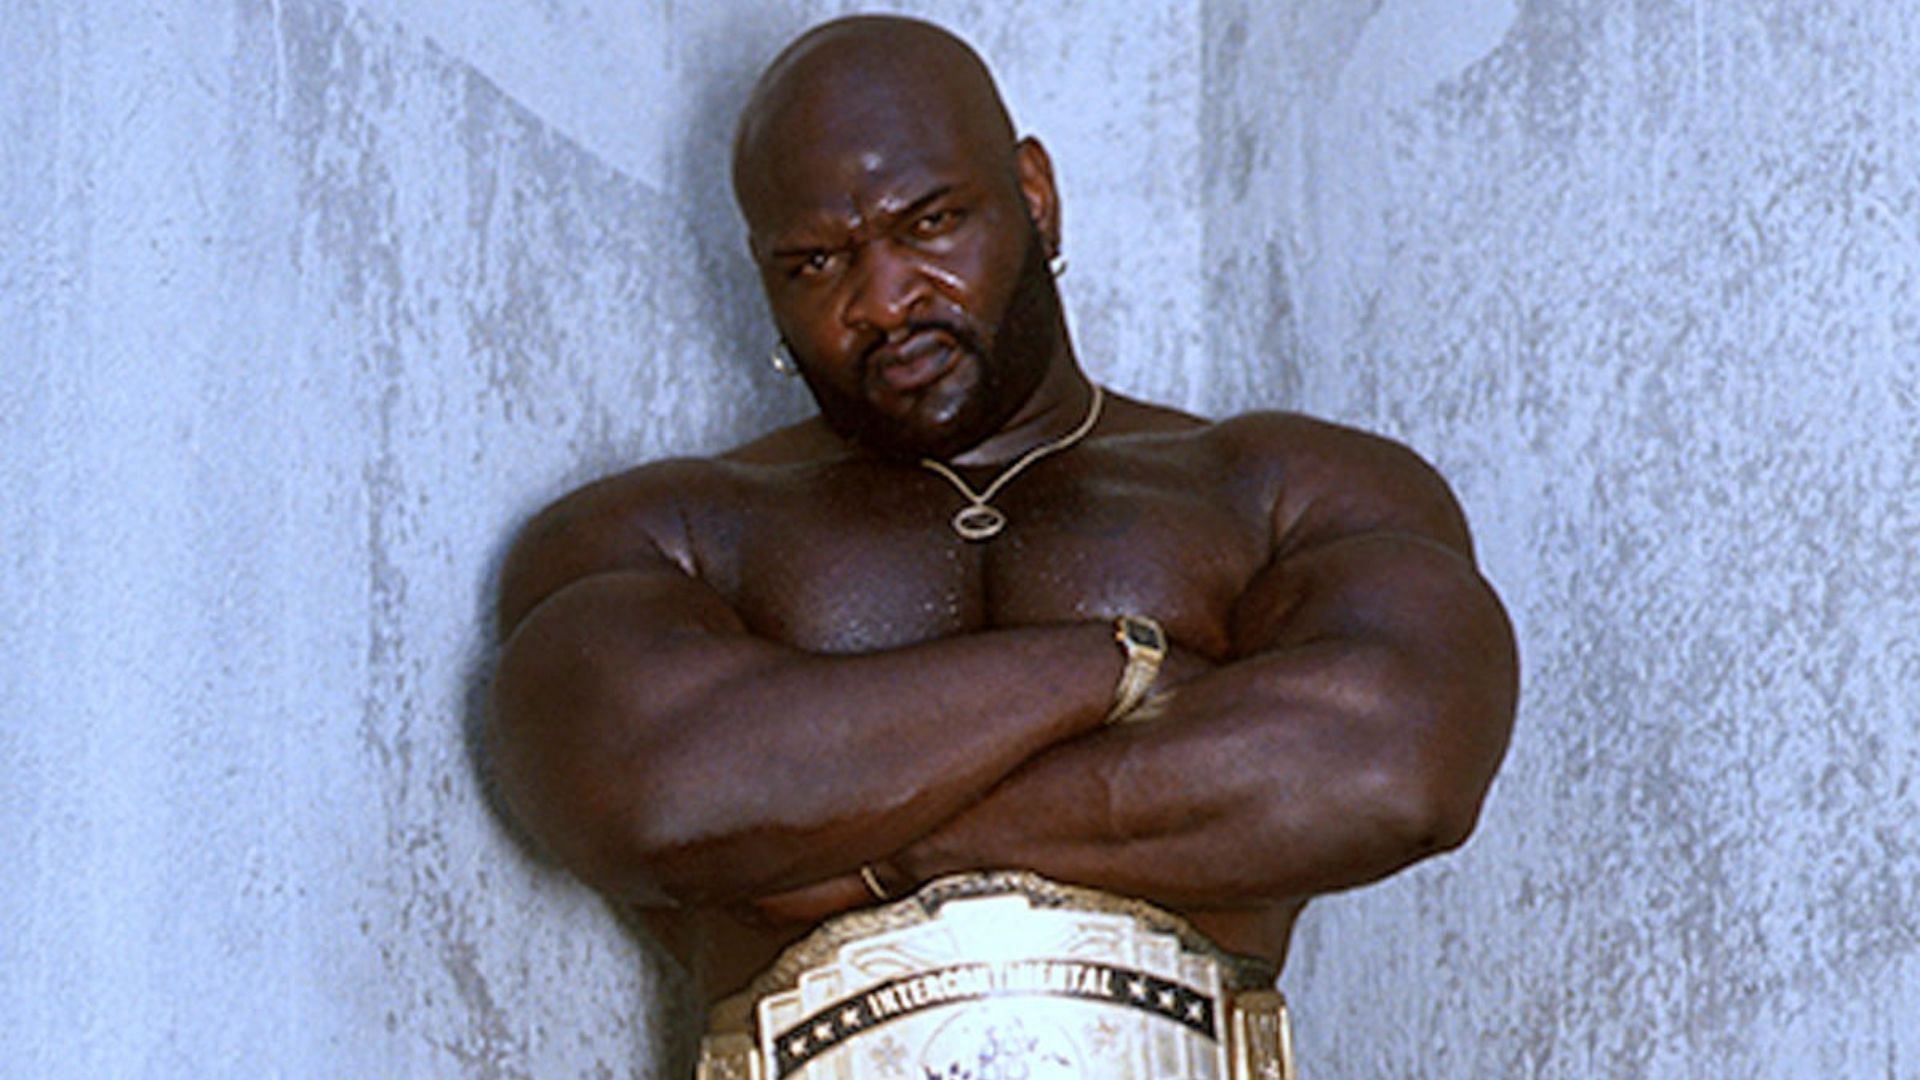 One-time WWE Intercontinental Champion Ahmed Johnson